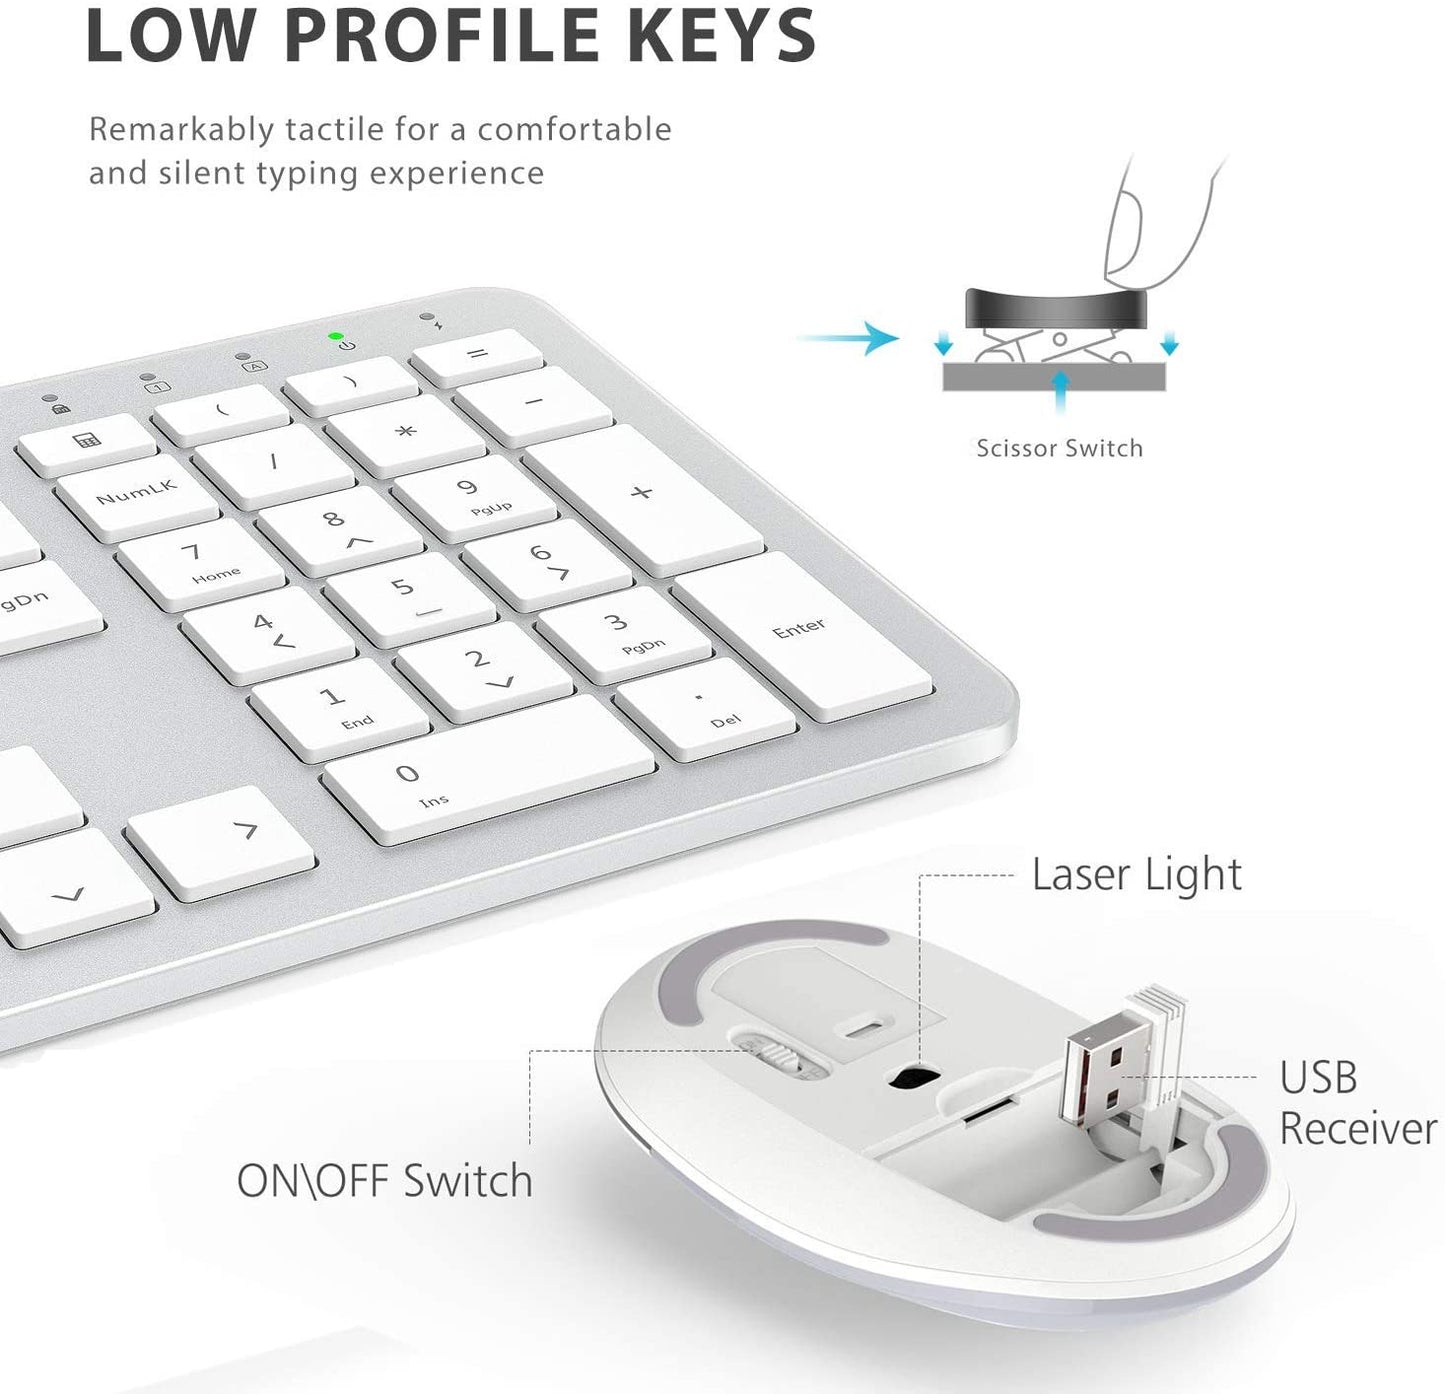 iClever GK08 2.4GHz 17 x 5 Inch Wireless Rechargeable Keyboard and Mouse Combo with Windows and Mac Compatibility GK-08 GK 08